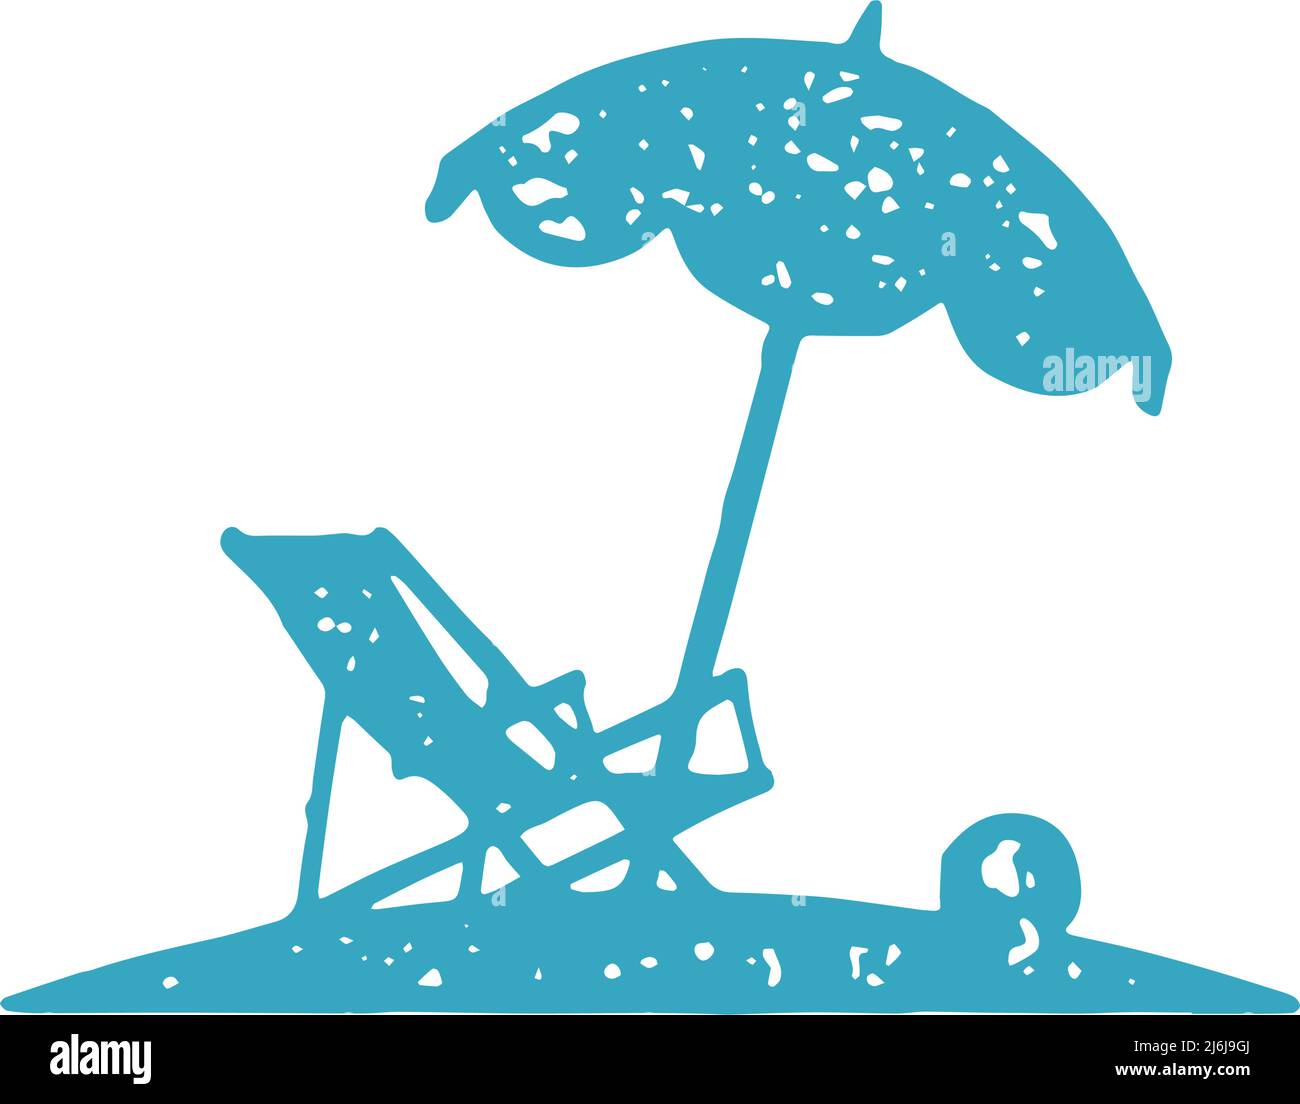 Summer chaise lounge with ball under umbrella beach leisure sunbathing relaxing hand drawn blue grunge texture vector illustration. Coast recreation l Stock Vector